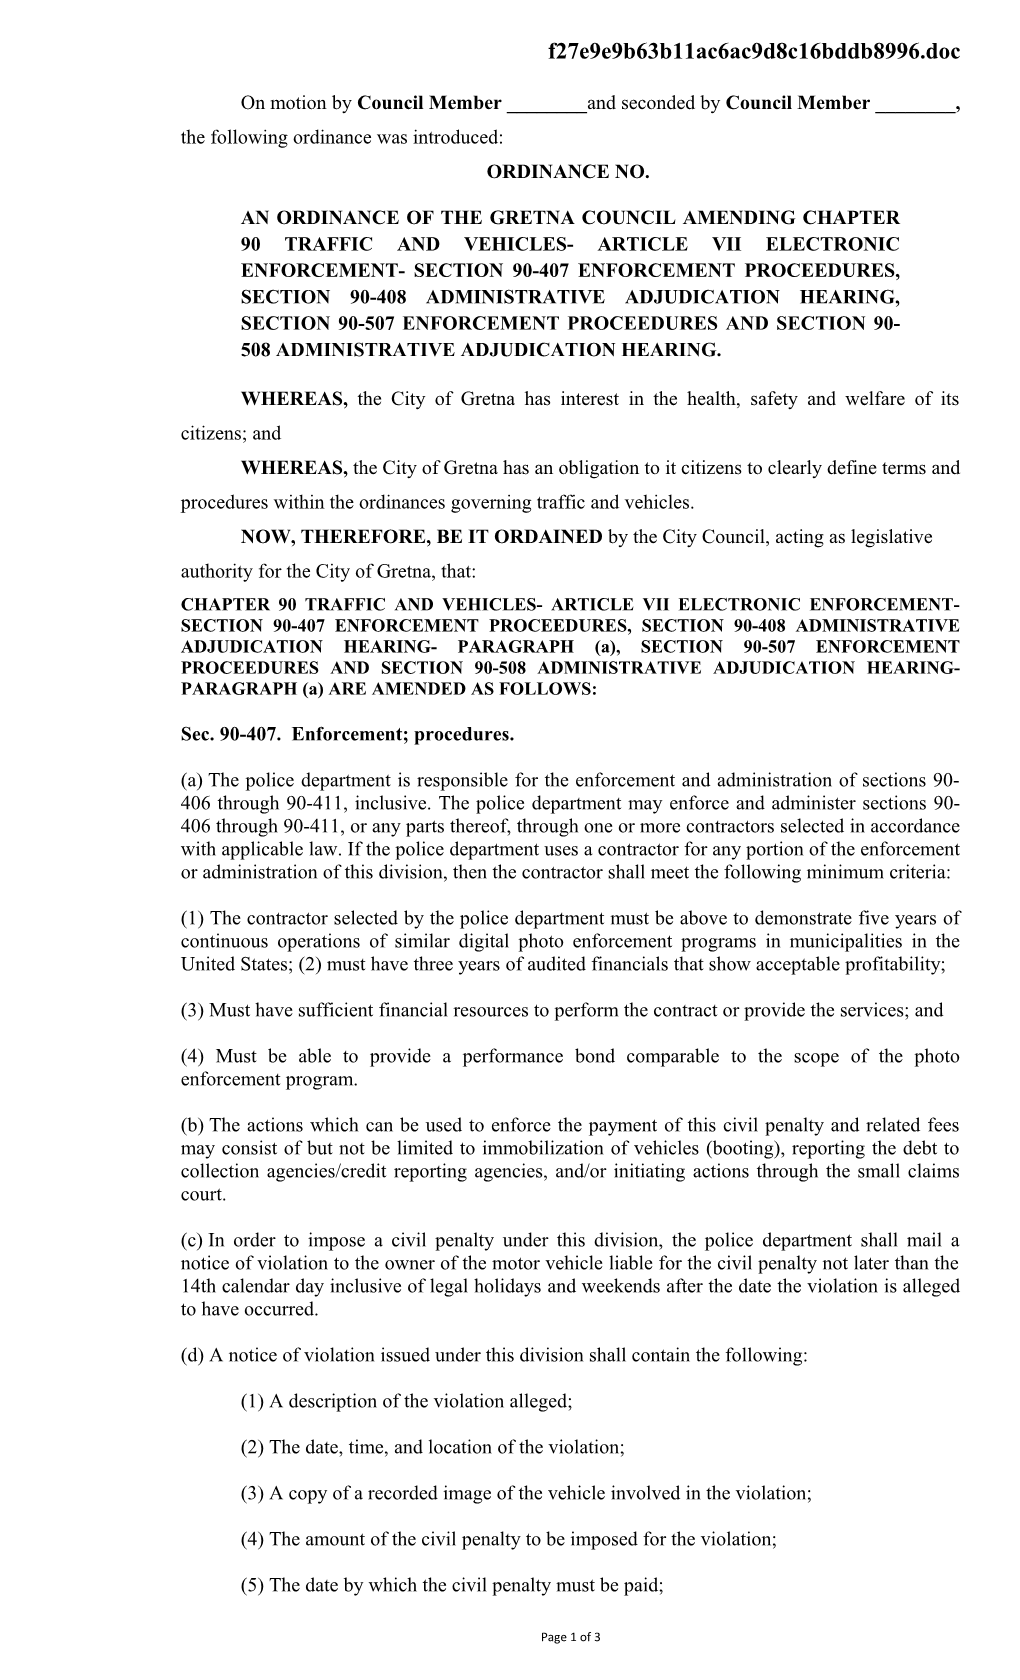 FLOOR ORD. B Amended Electronic Enforcemt. Chap. 90 March 2009